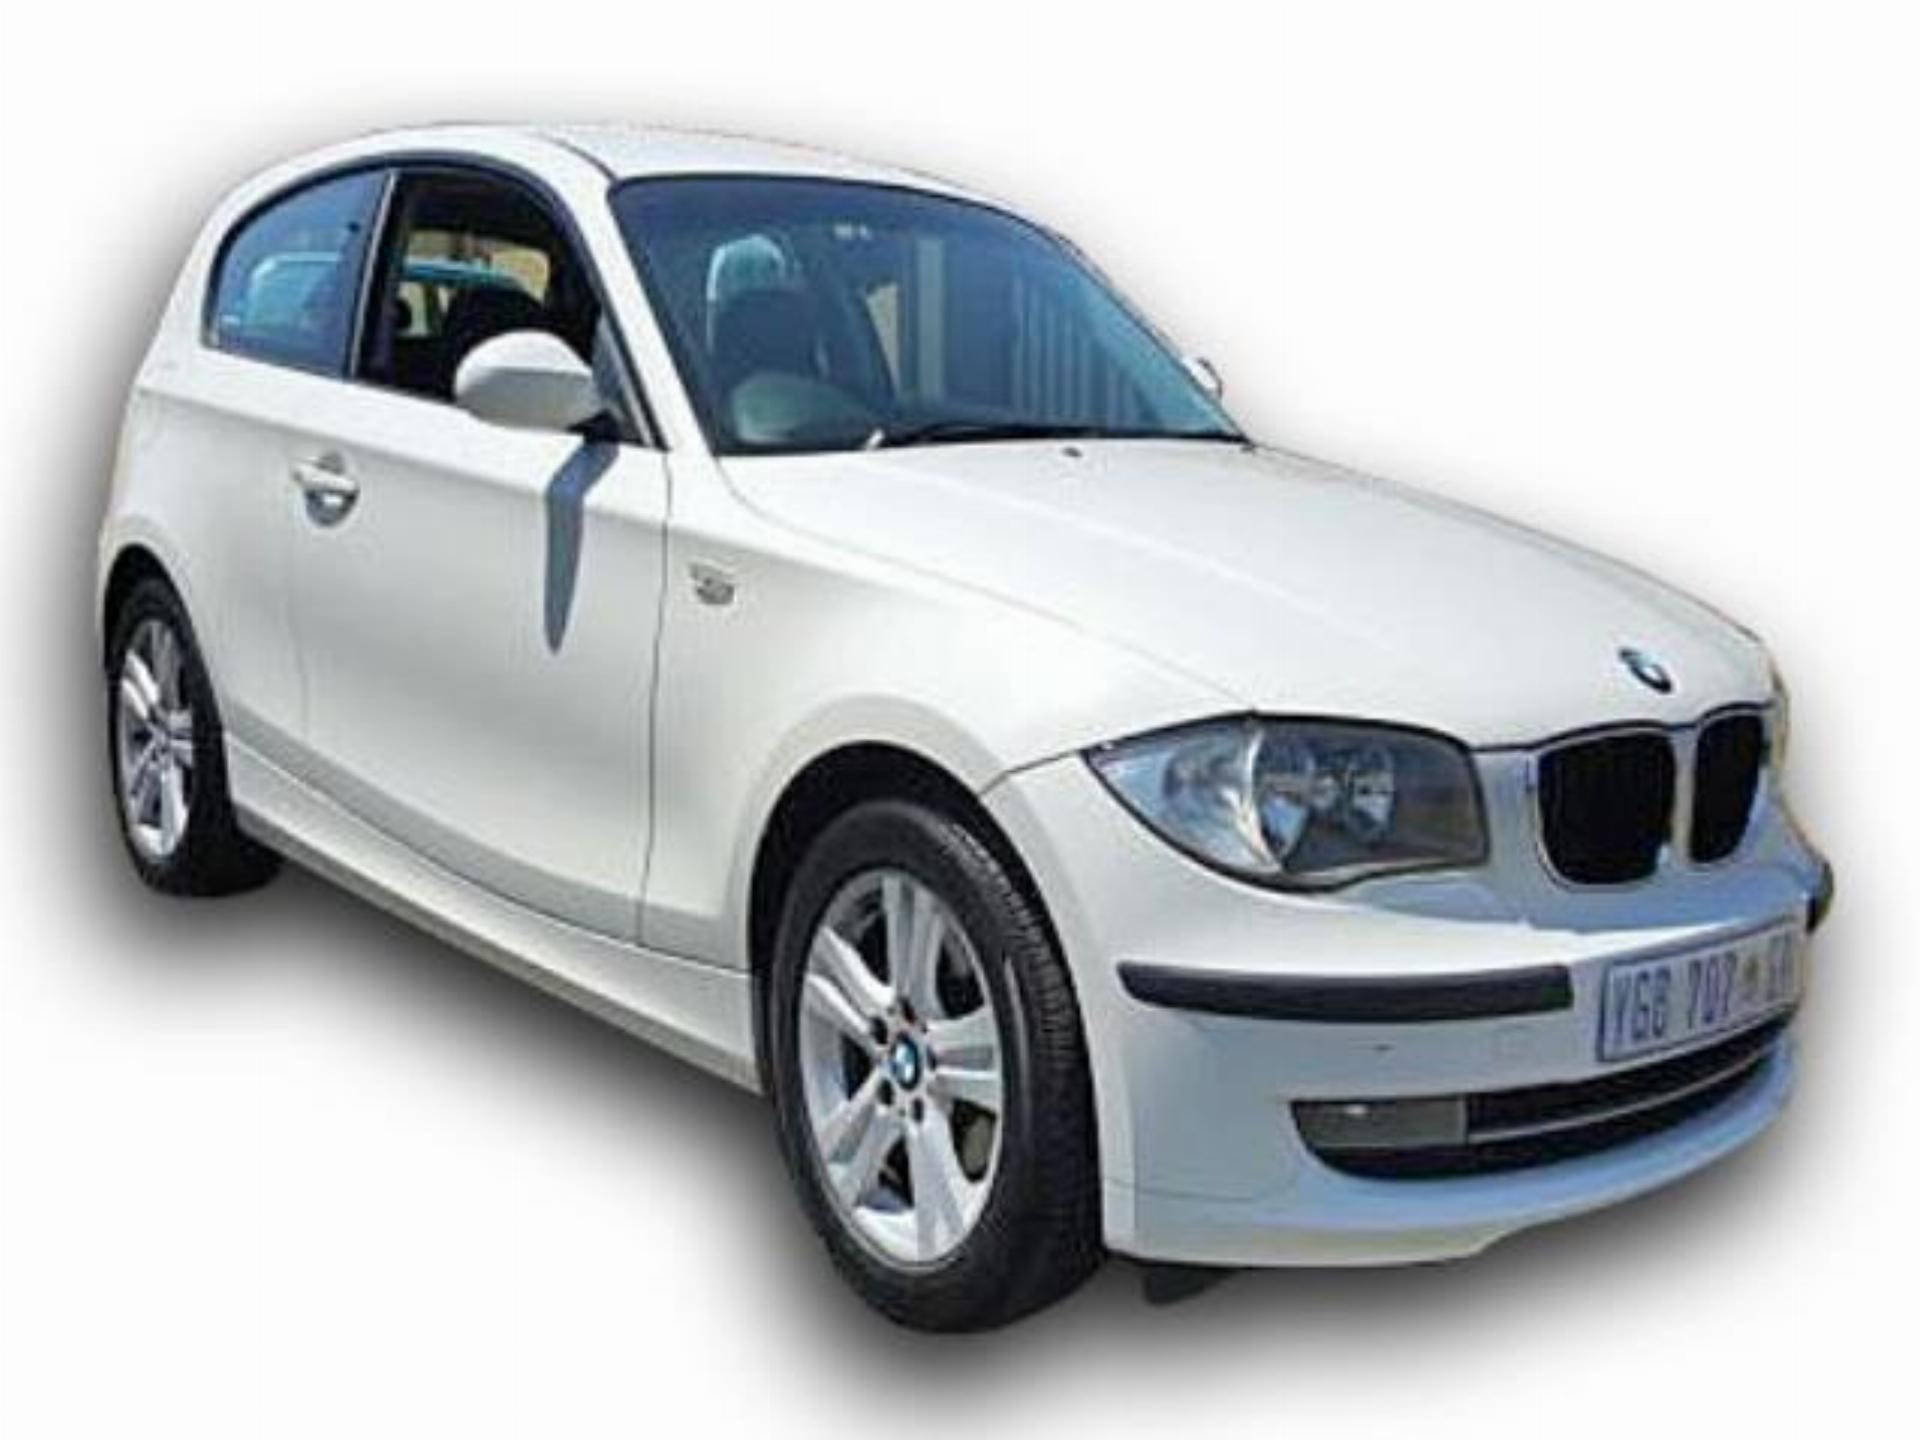 Used 1 Series BMW 1SERIES Coupe 116I (M) 6 Speed 2009 on